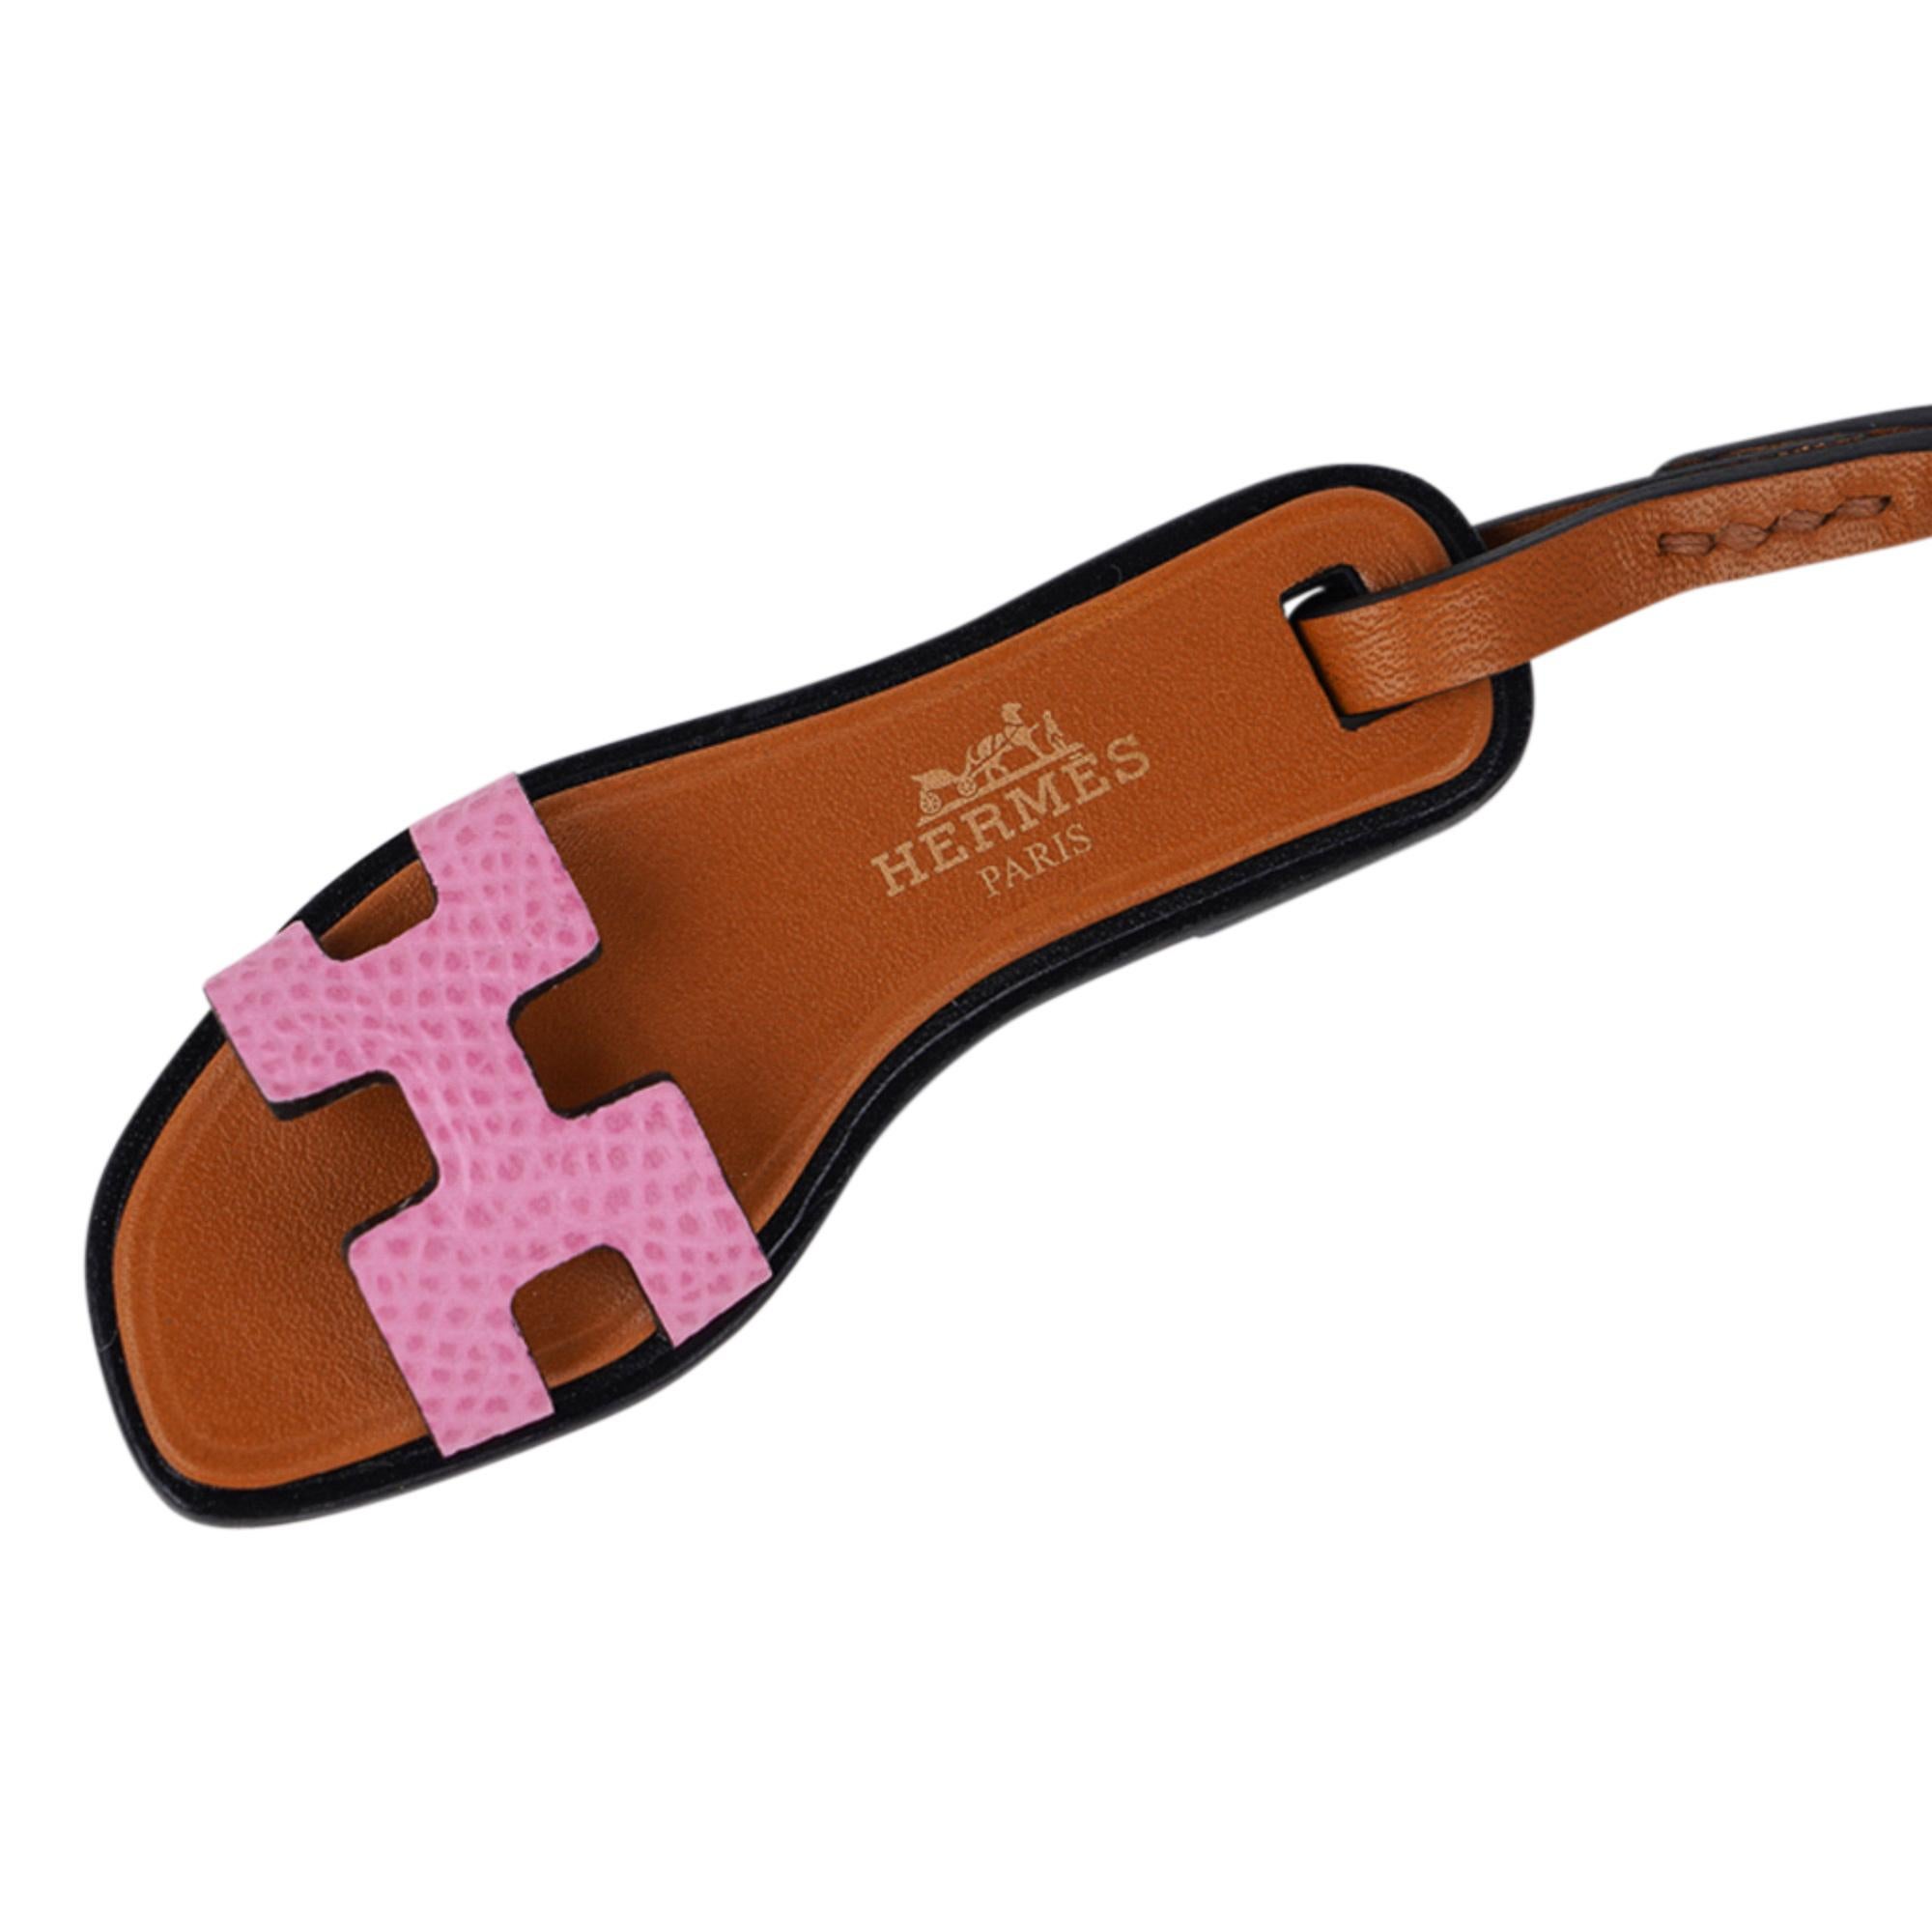 Mightychic offers an Hermes Oran Nano bag charm featured in 5P Pink.
Charming and playful she easily adorns a myriad bag colours in your fabulous collection.
Hermes 5P Pink is frequently referred to as Bubblegum.  However, the official name is